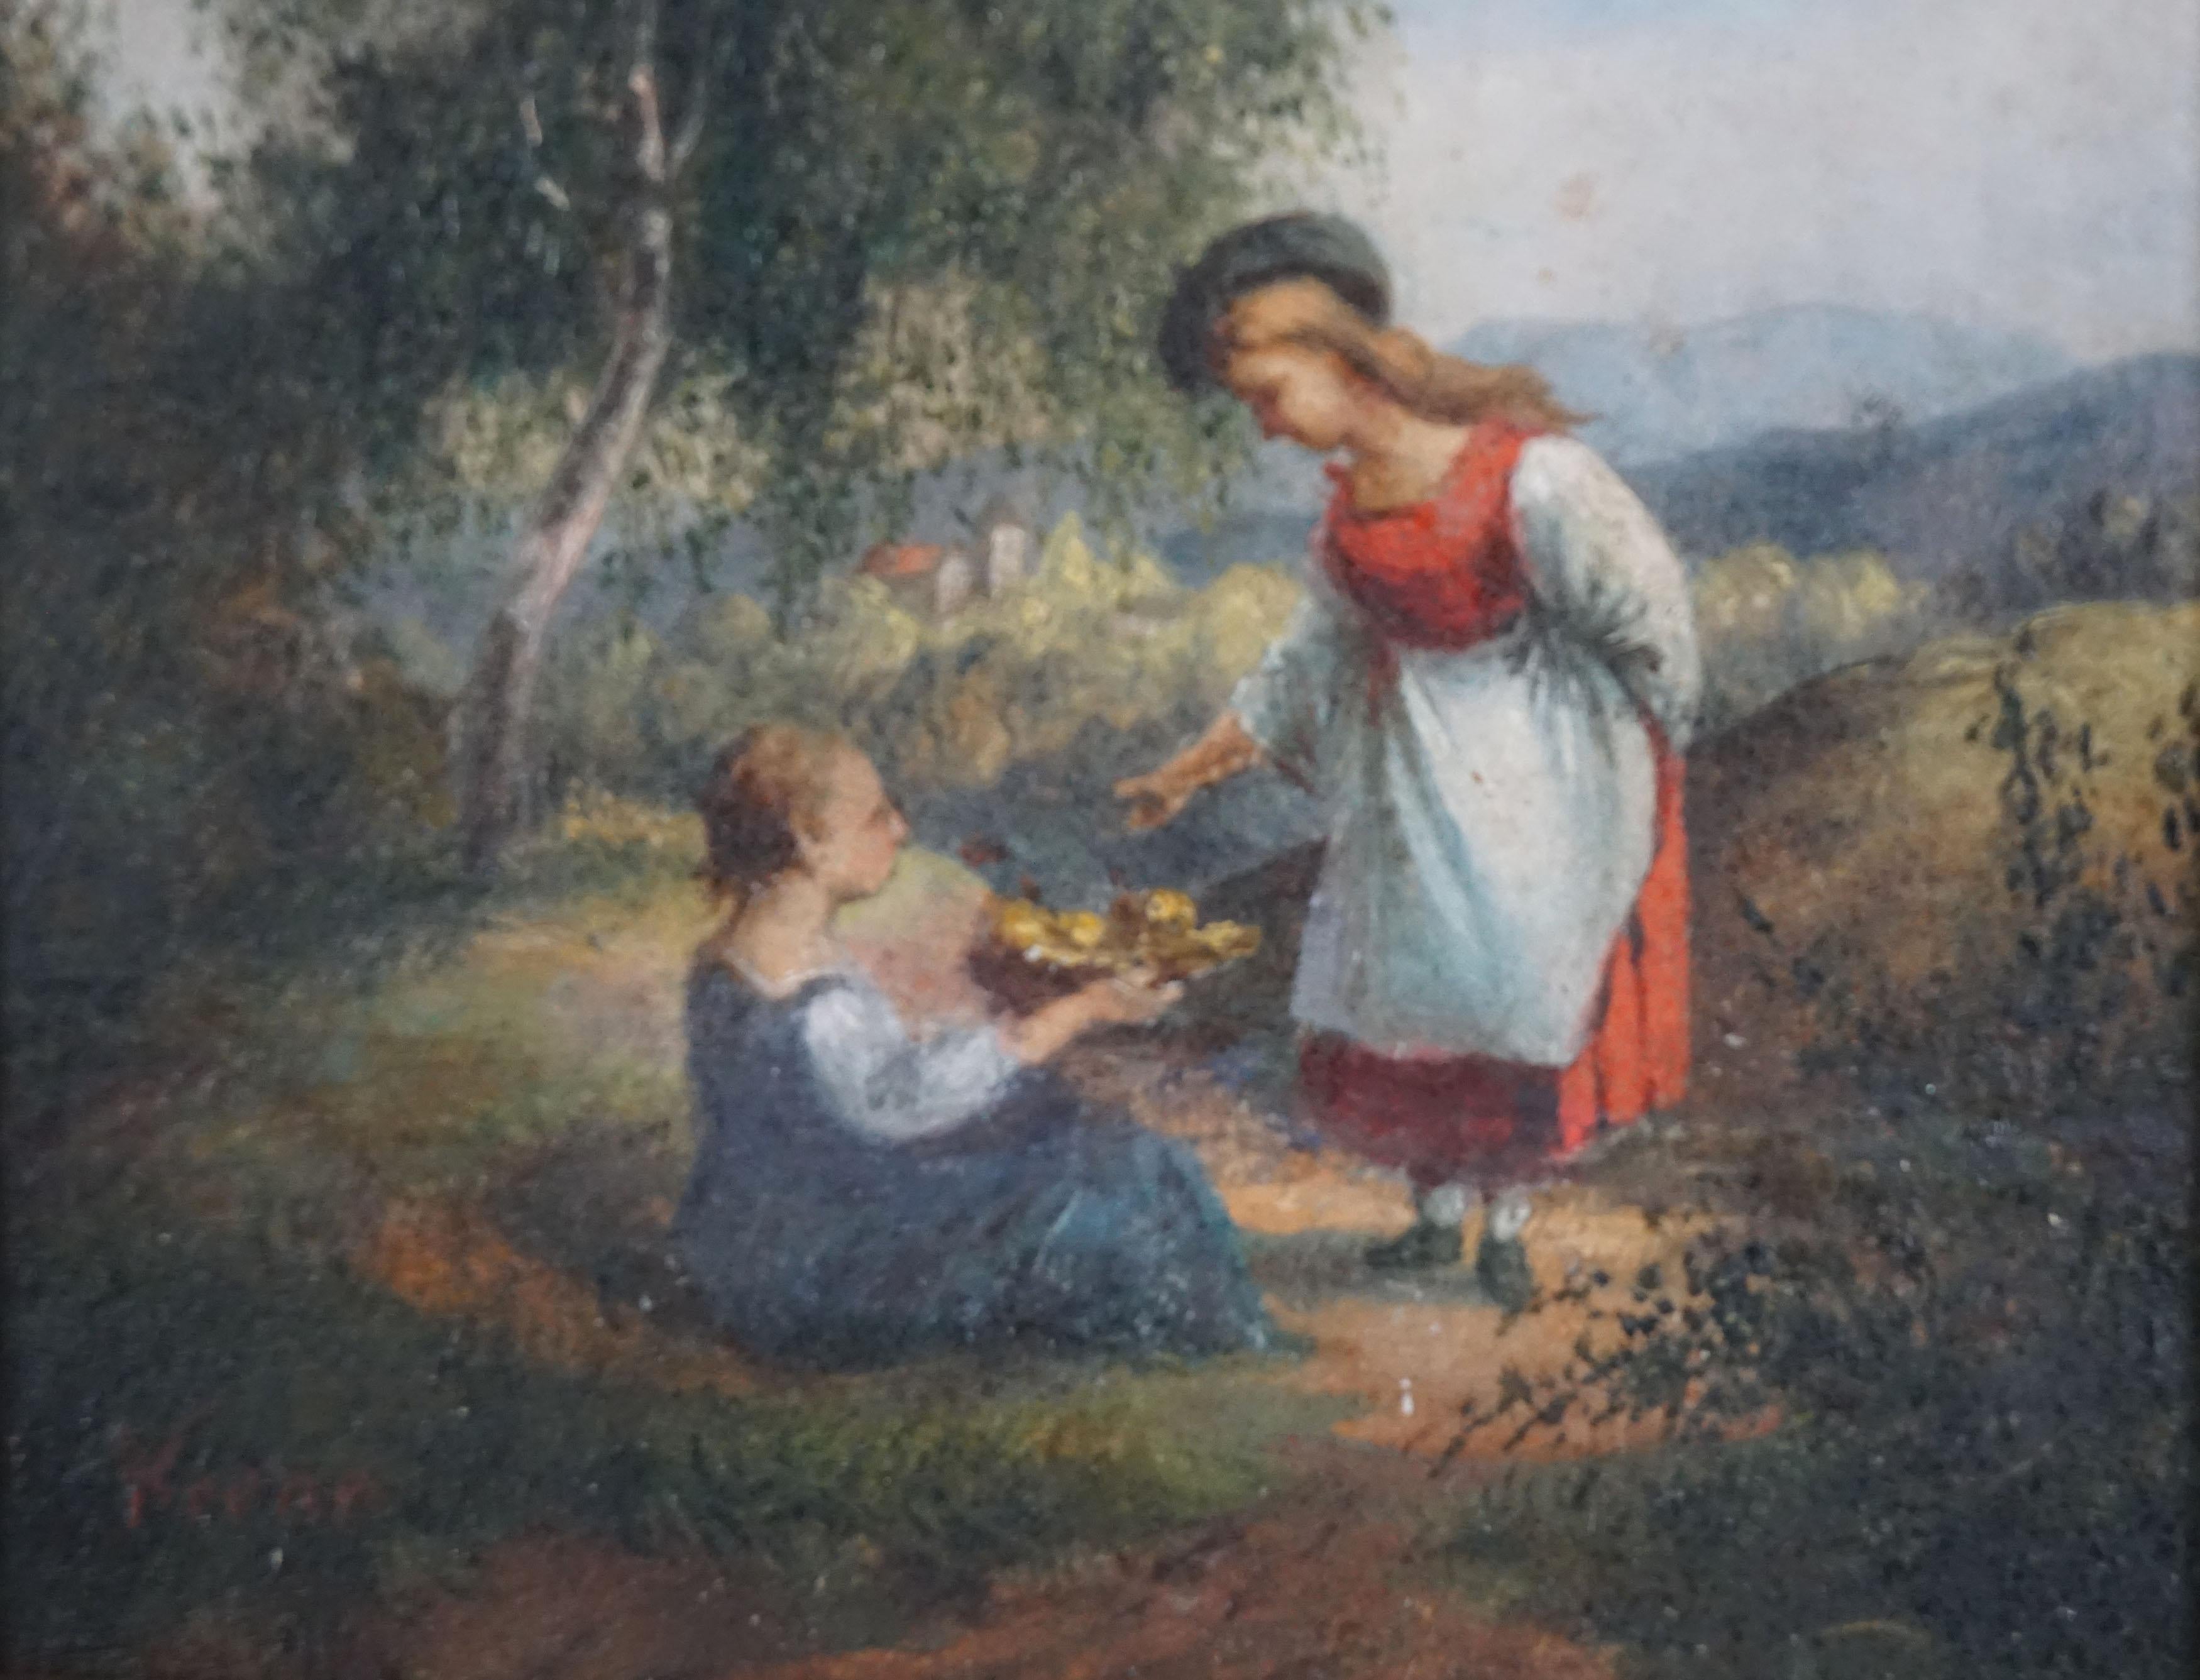 Original Miniature 19th Century Austrian Pastoral Figurative Oil Painting on Wood

Painted in the manner of late Romanticism, this charming miniature pastoral landscape by Edmund Friedrich Arthur Krenn (Austrian, 1846-1902), circa 1875. 

This